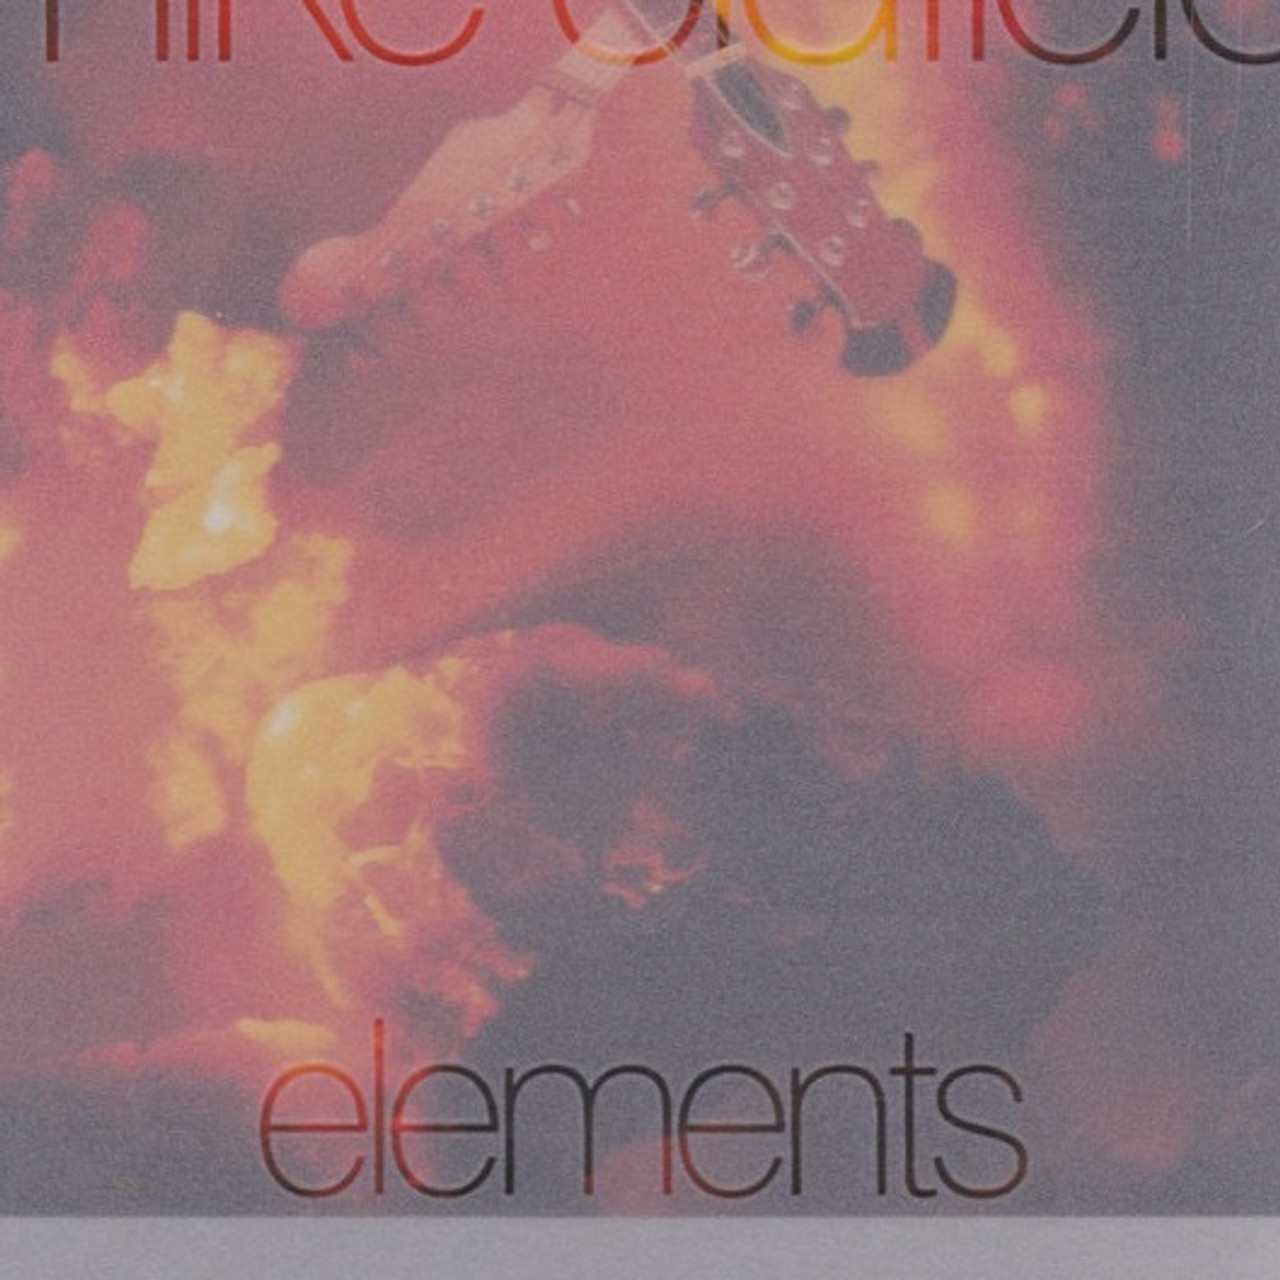 Mike Oldfield - Elements (4 CD Boxset) - The Record Centre